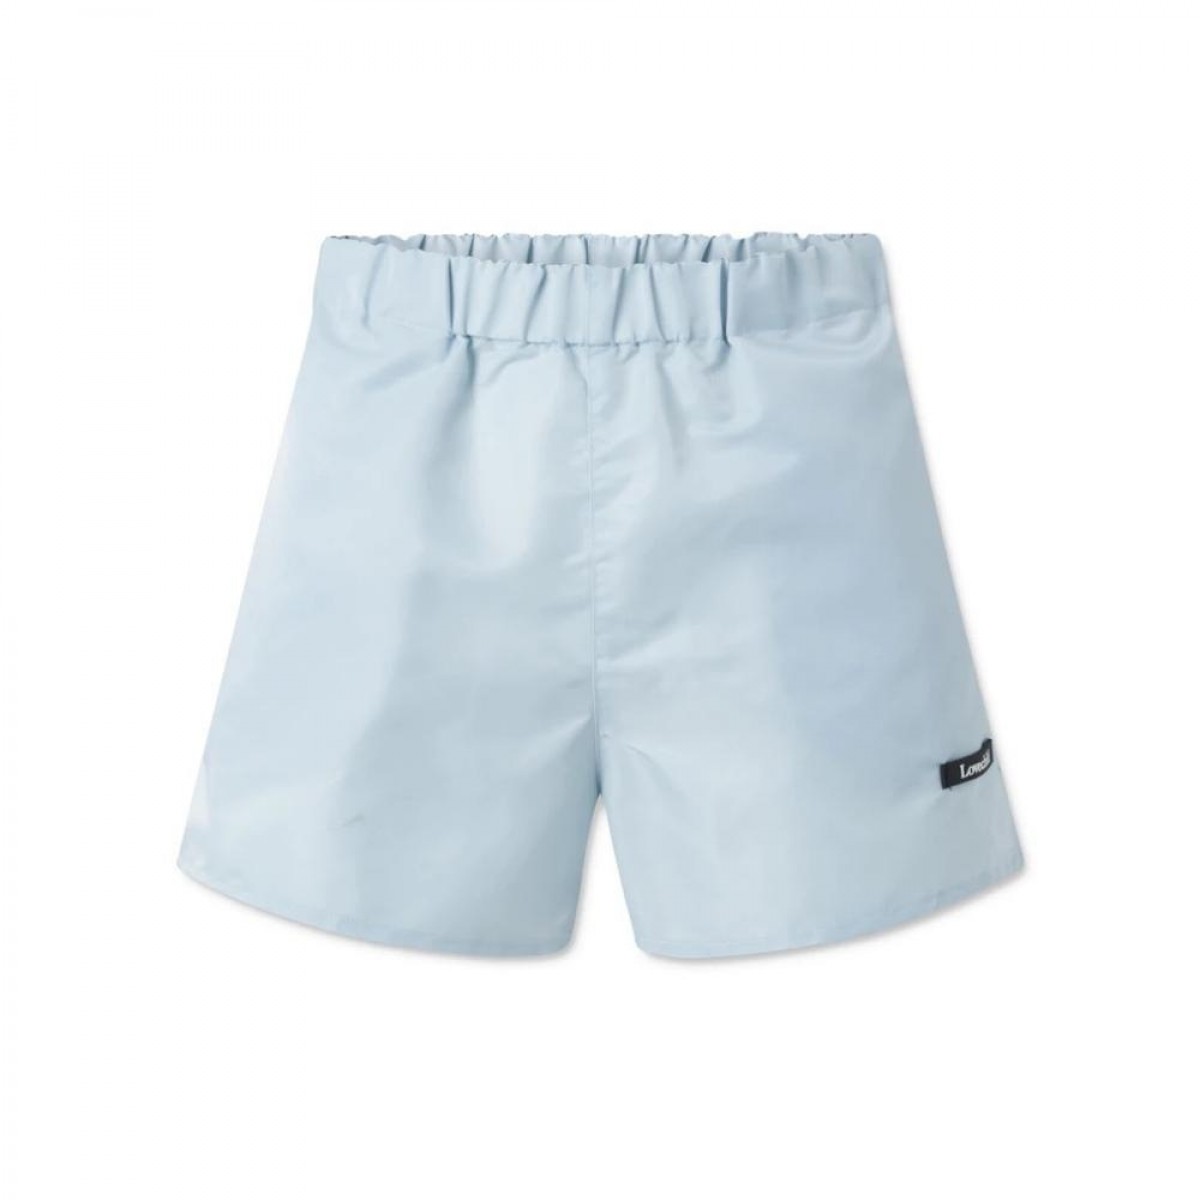 alessio shorts - spring skies - front